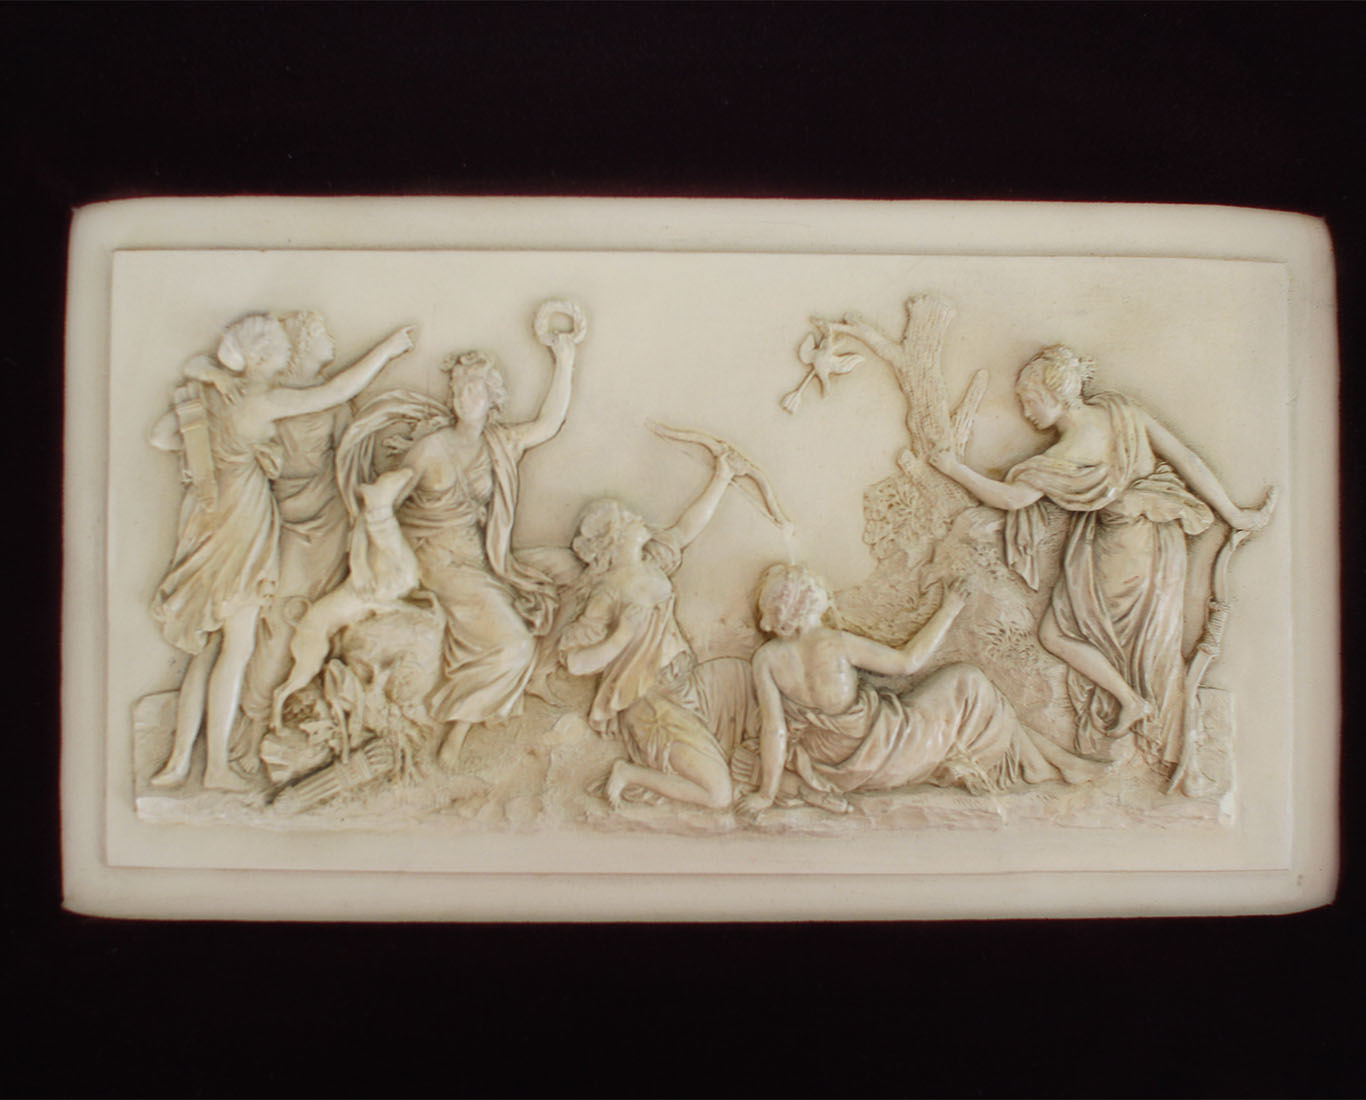  Ivory relief of Diana the huntress